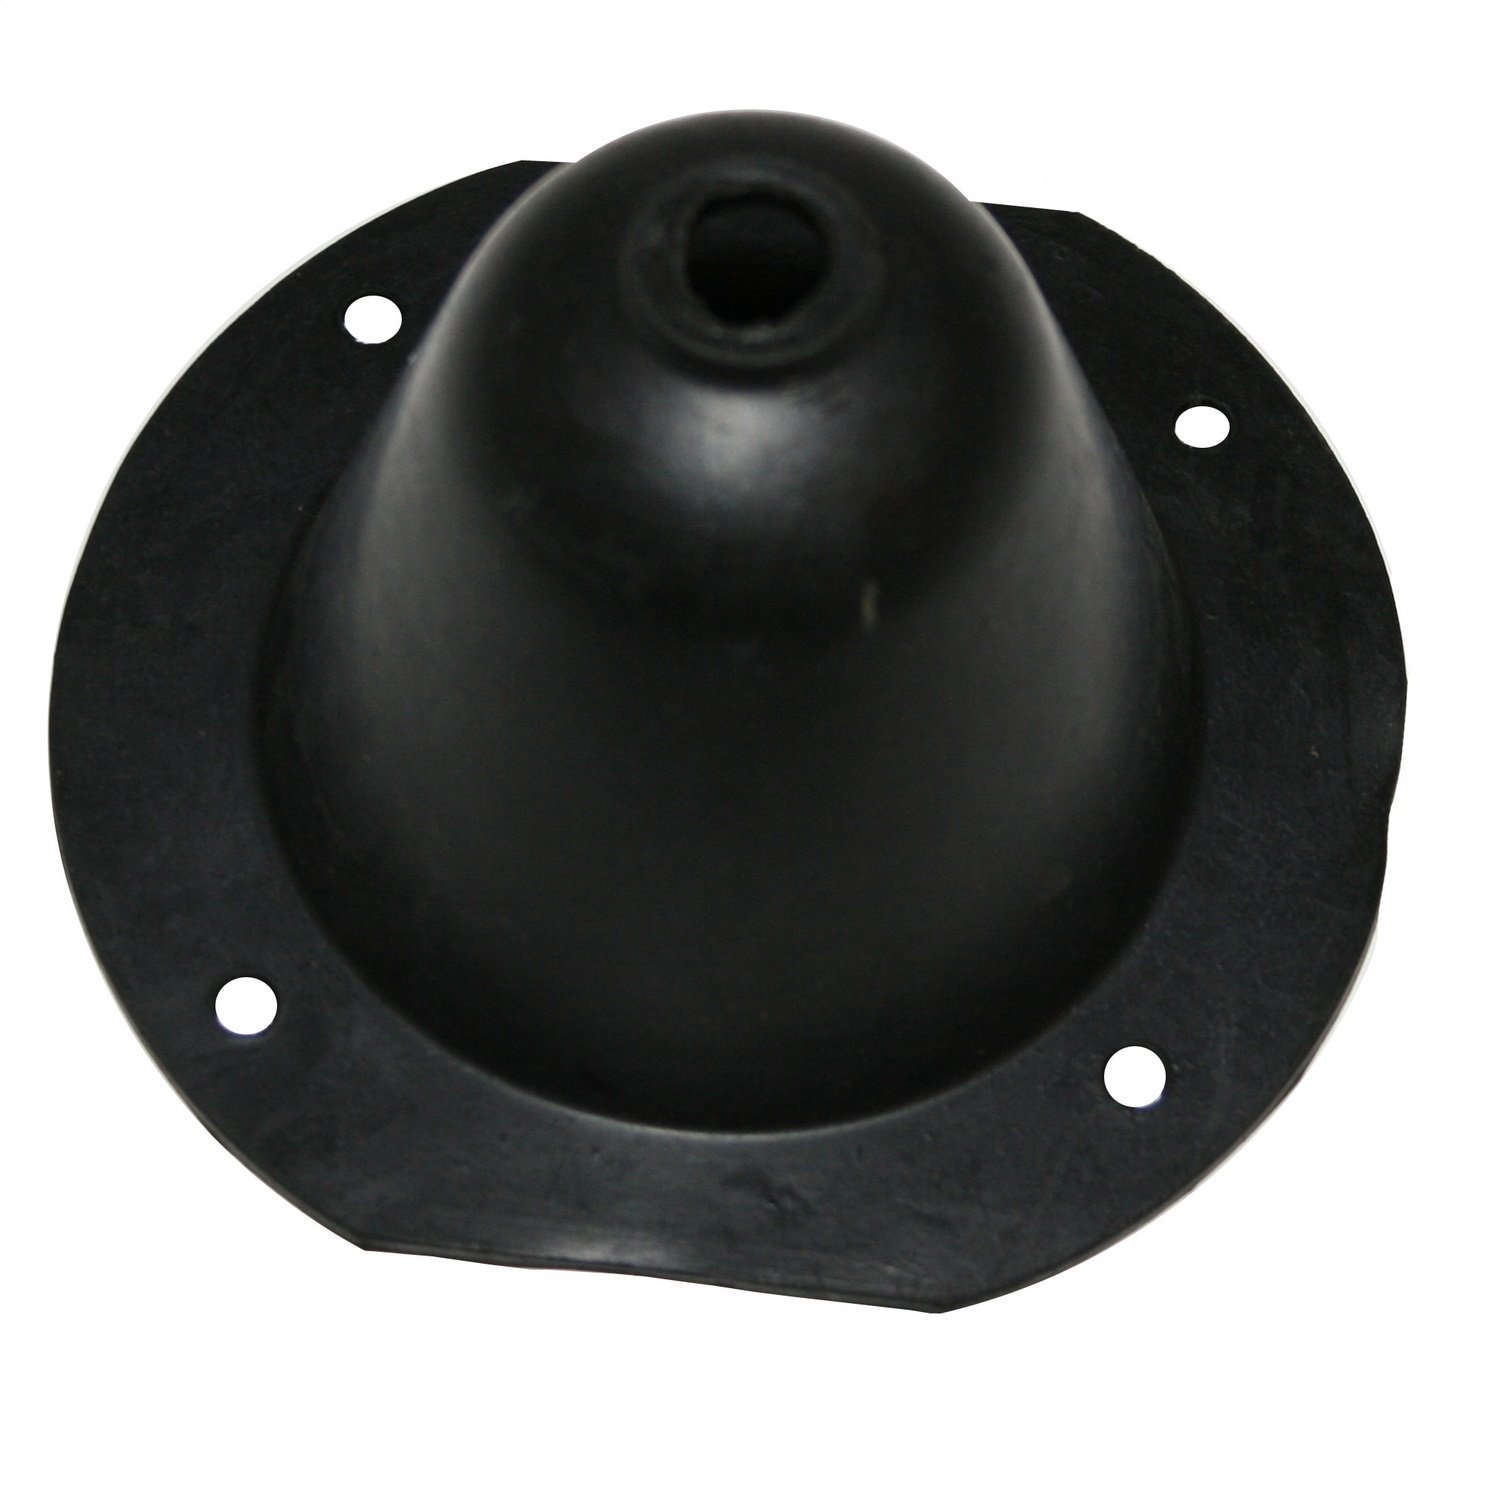 Manual Transmission Shifter Boot for T90 transmissions in 1941-1971 Willys and Jeep Vehicles